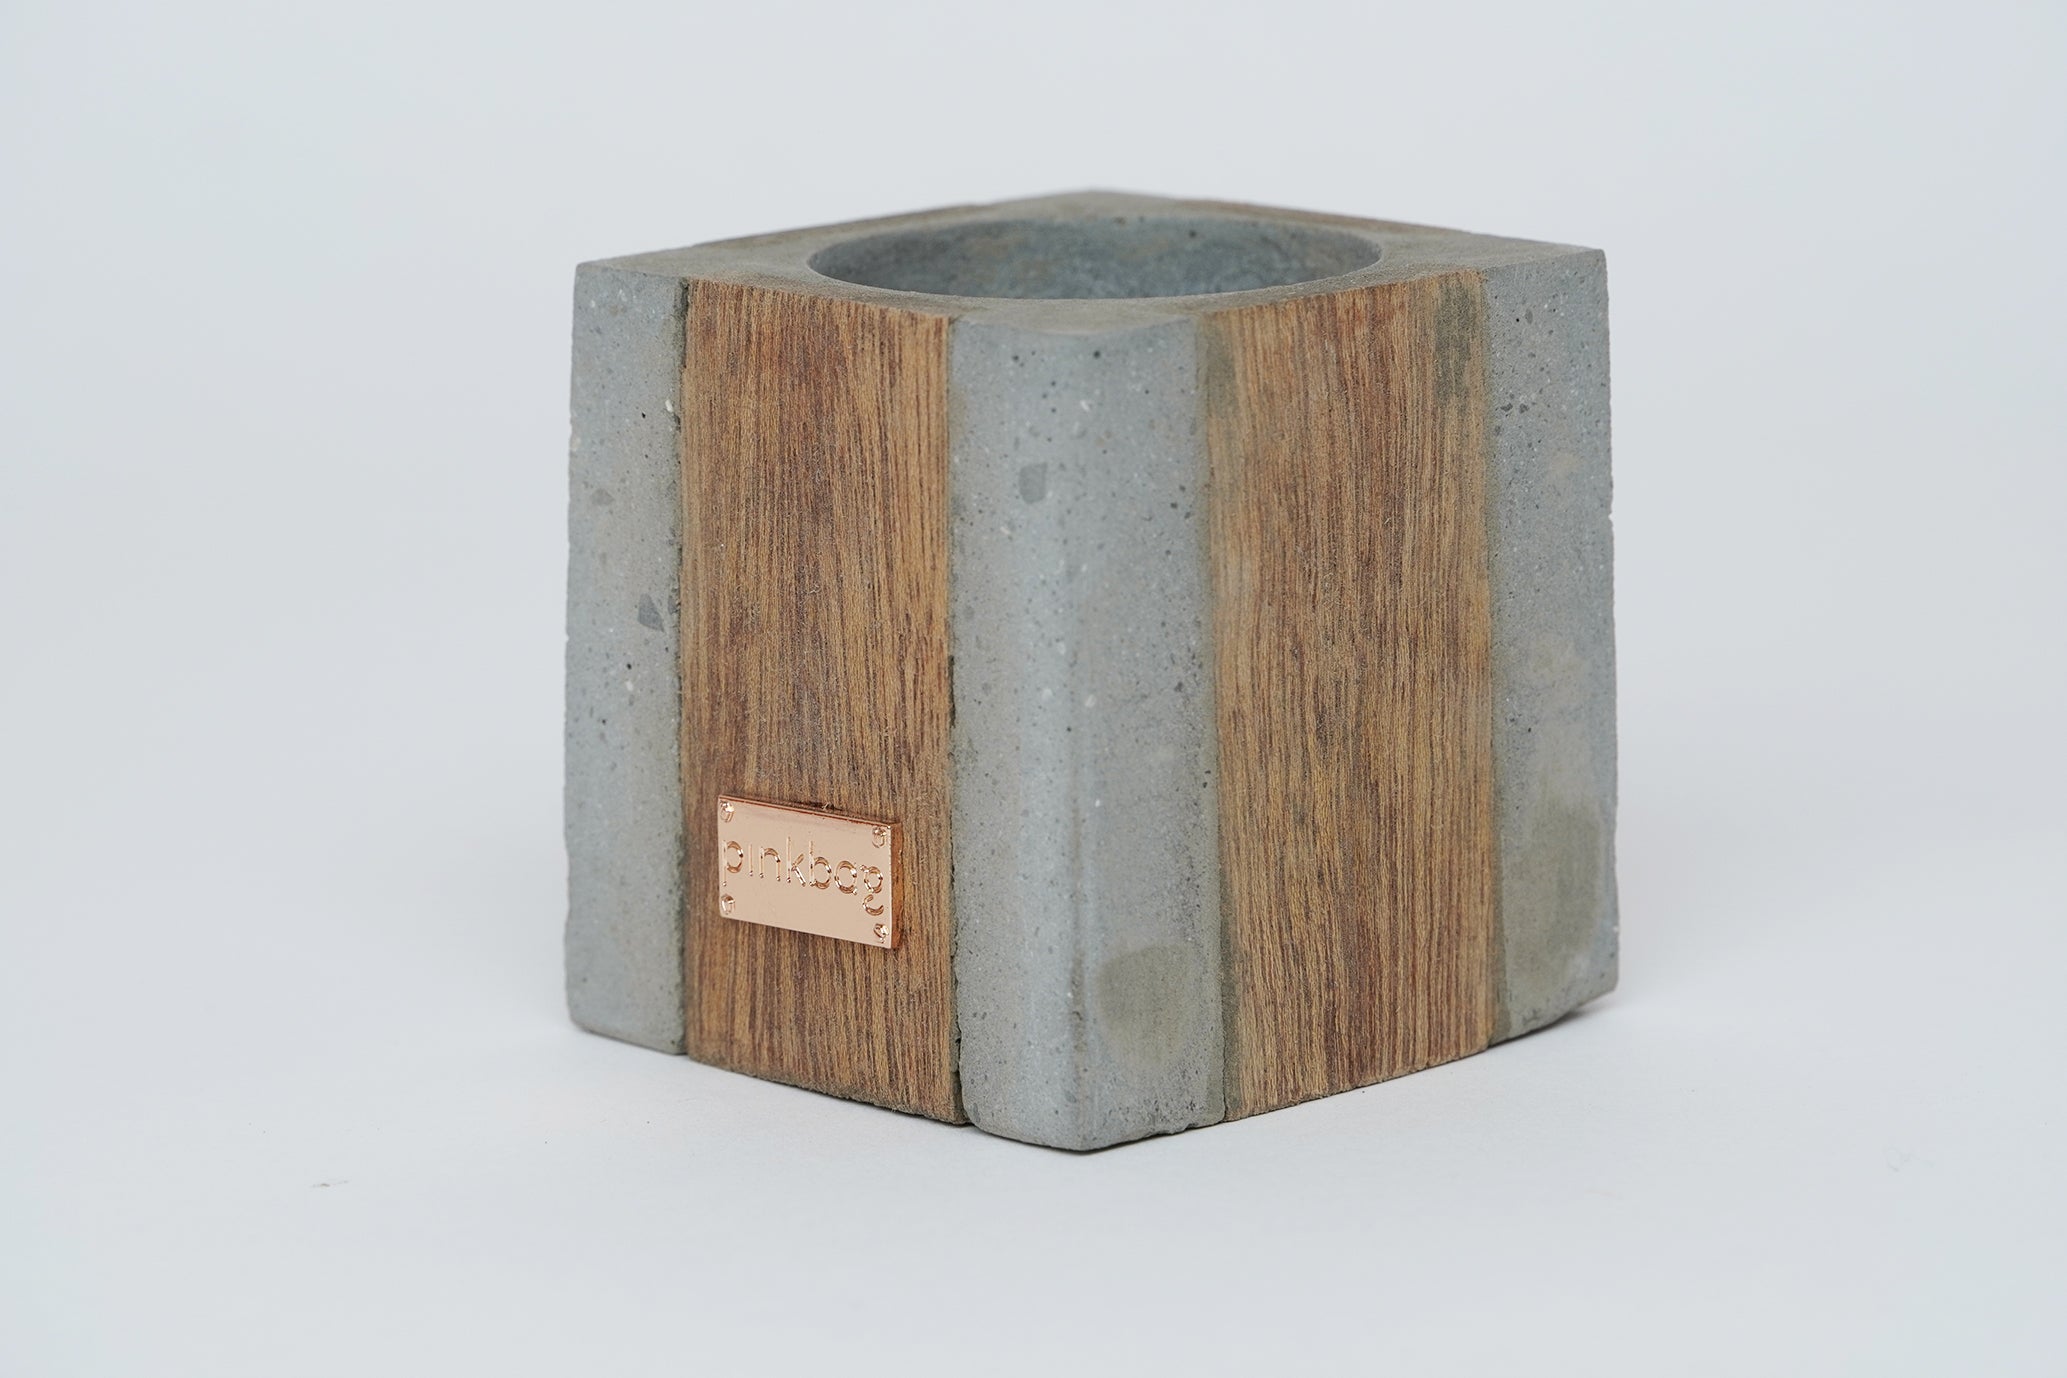 4D wood|concrete GIFT | pink